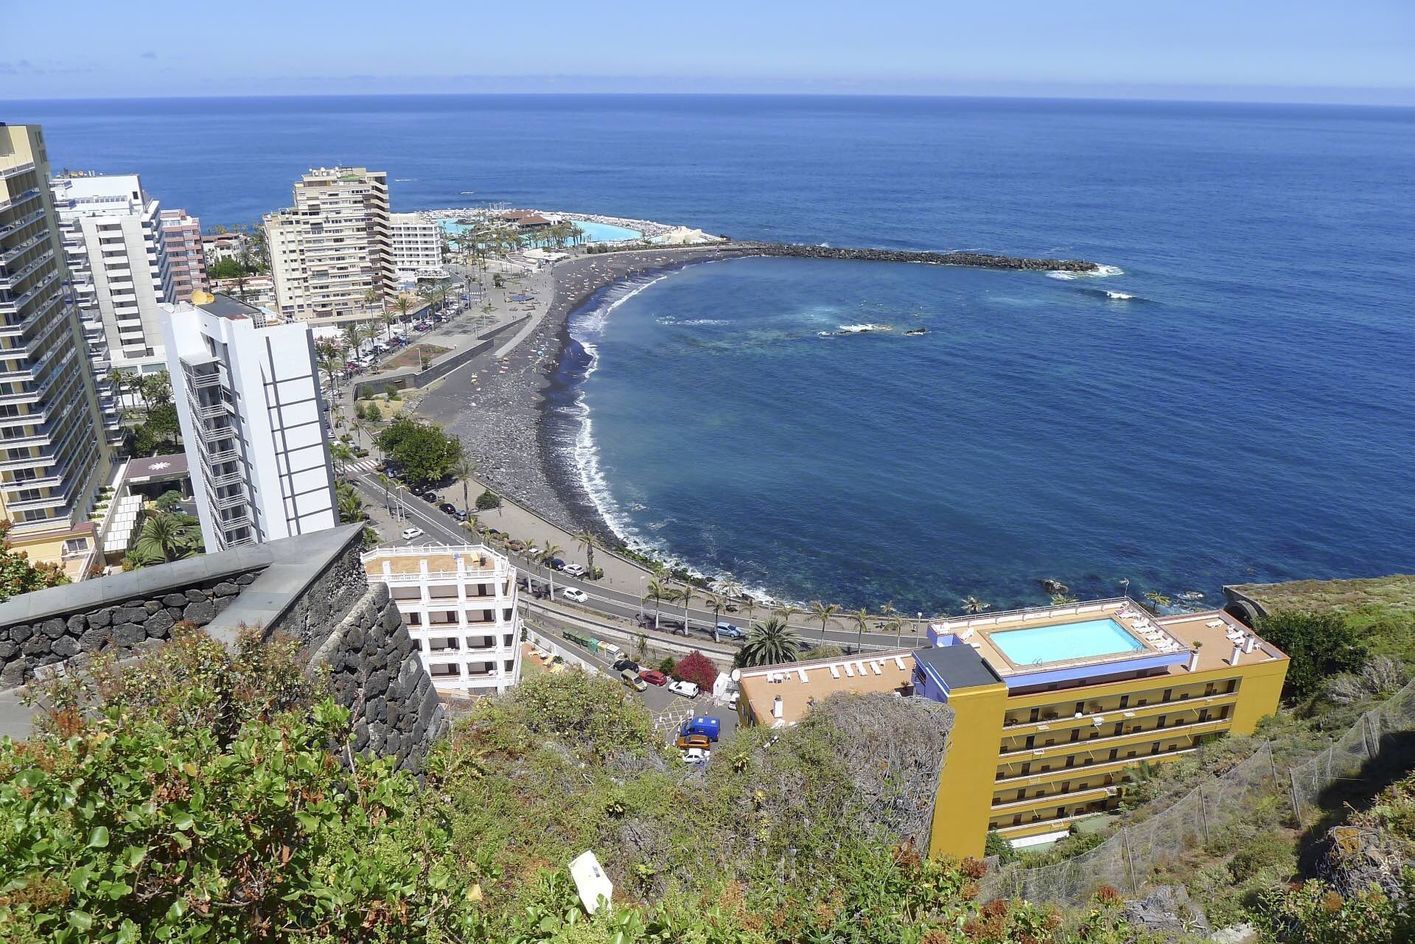 Los Cristianos, best area to stay in tenerife for families